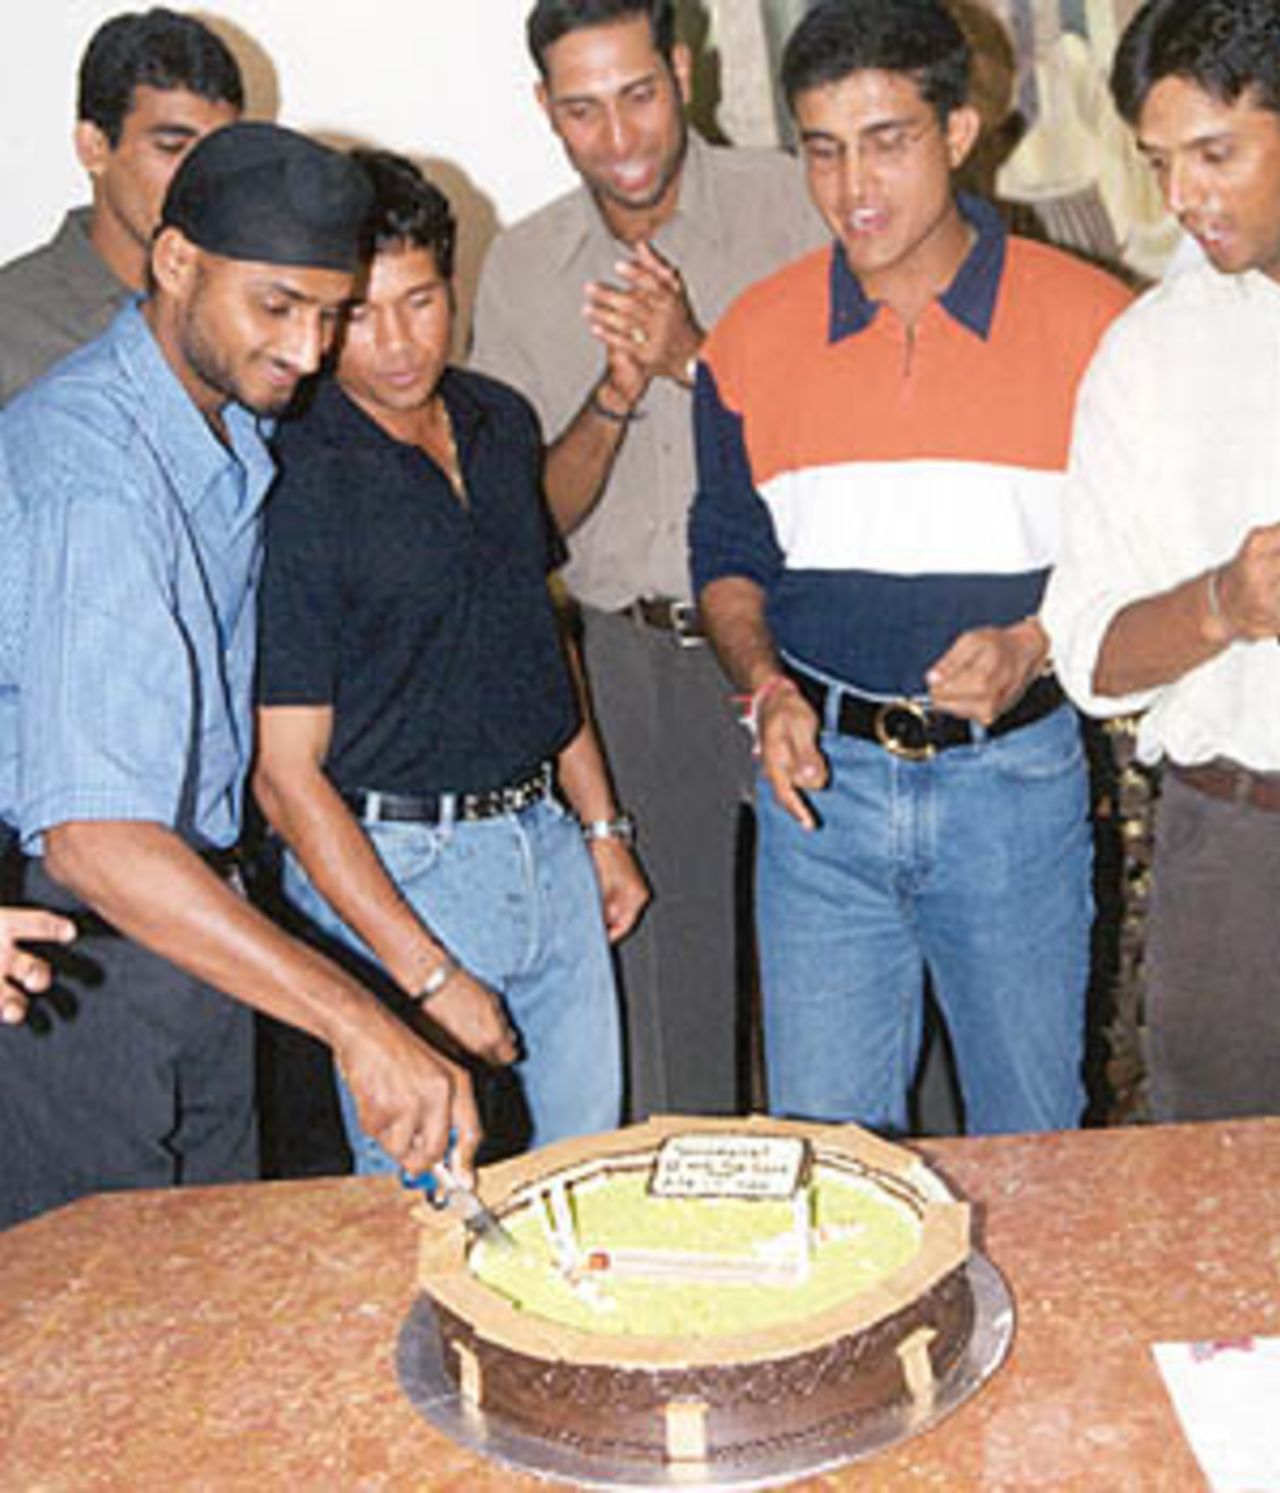 The Indian team celebrate the recovery of the Border-Gavaskar Trophy in style at the Taj Coromandel in Chennai, 22 March 2001.